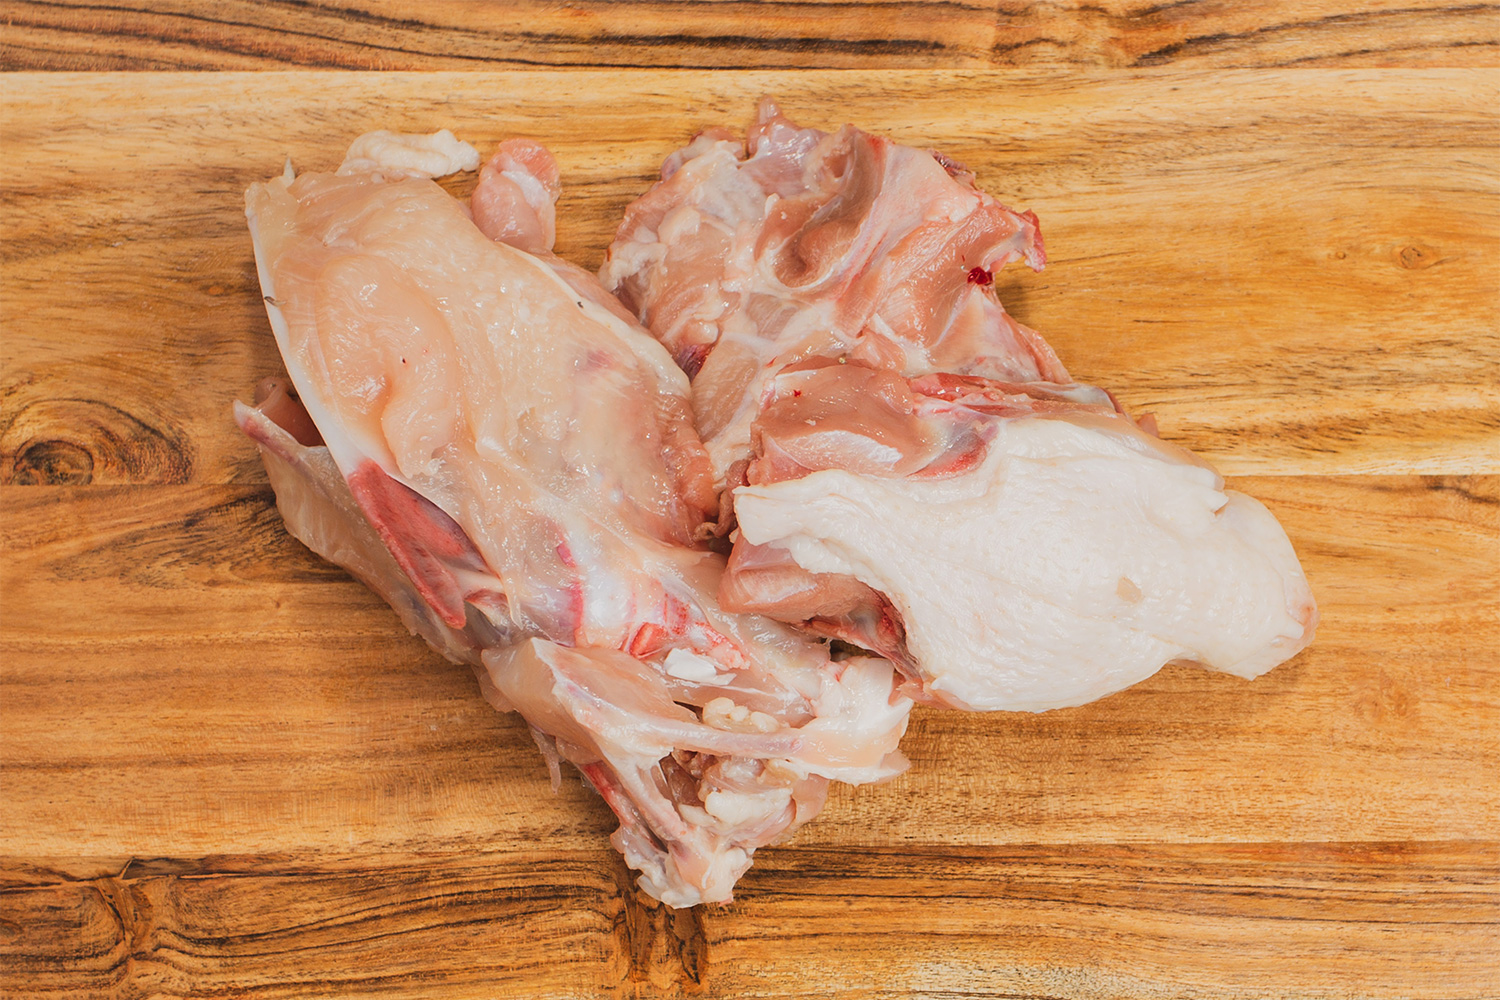 Raw feeding through nutritious chicken frames, providing essential proteins and bone content for your dog's healthy diet.